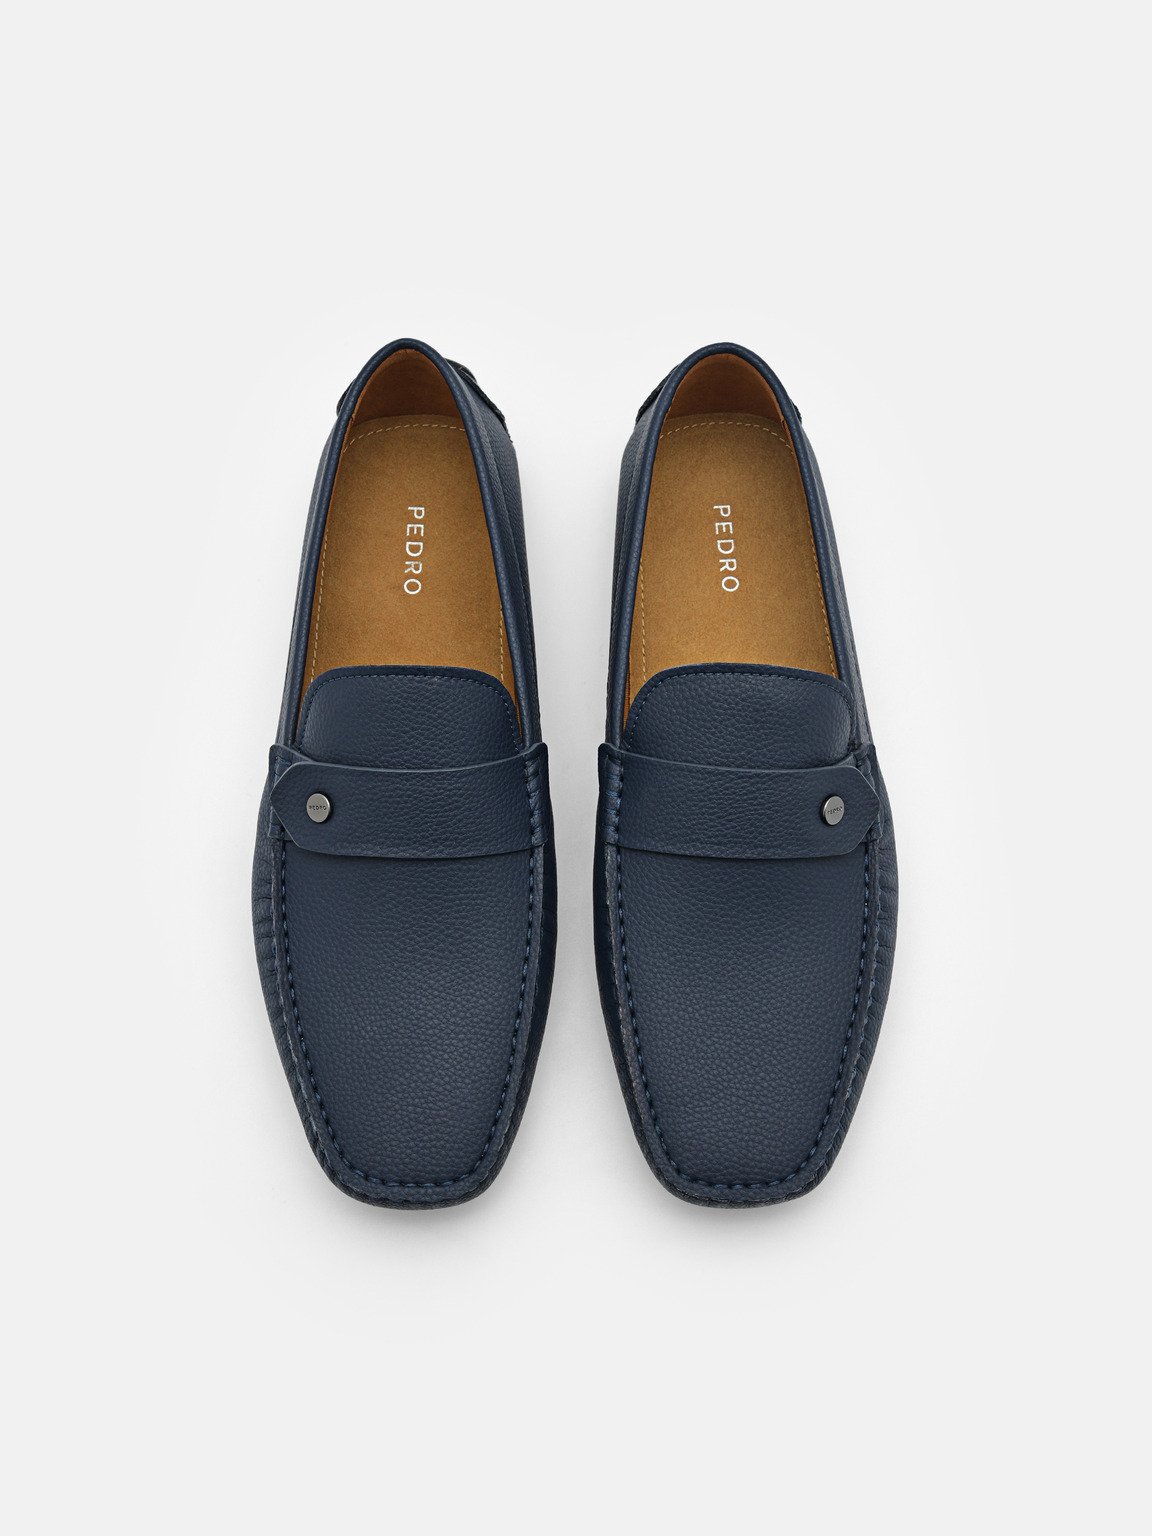 Oliver Driving Shoes, Navy